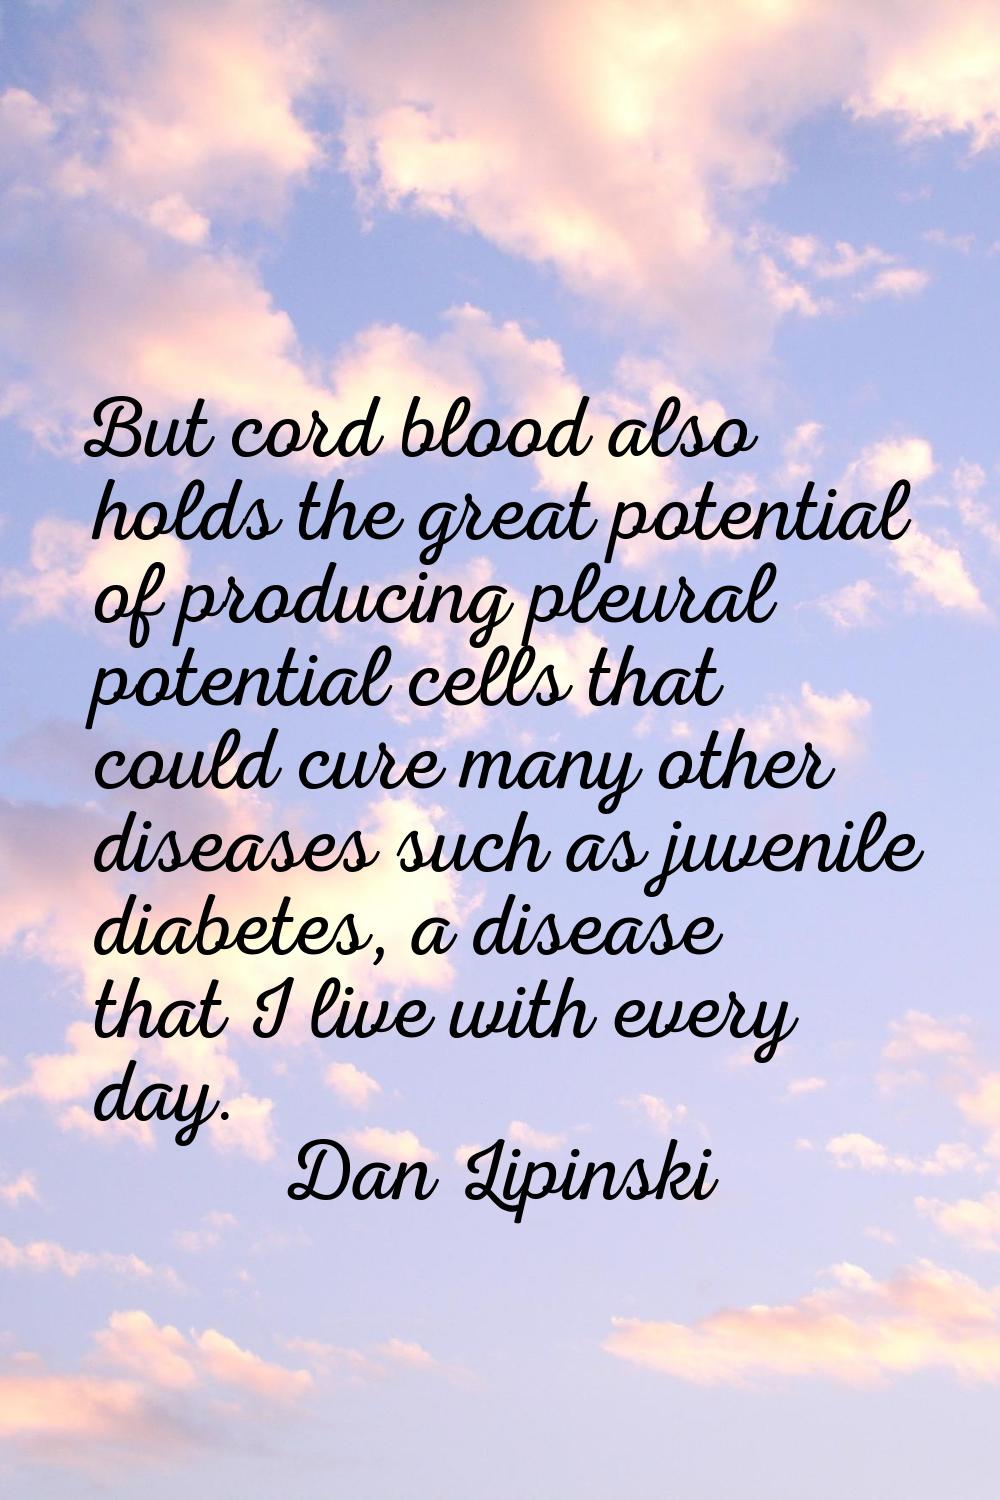 But cord blood also holds the great potential of producing pleural potential cells that could cure 